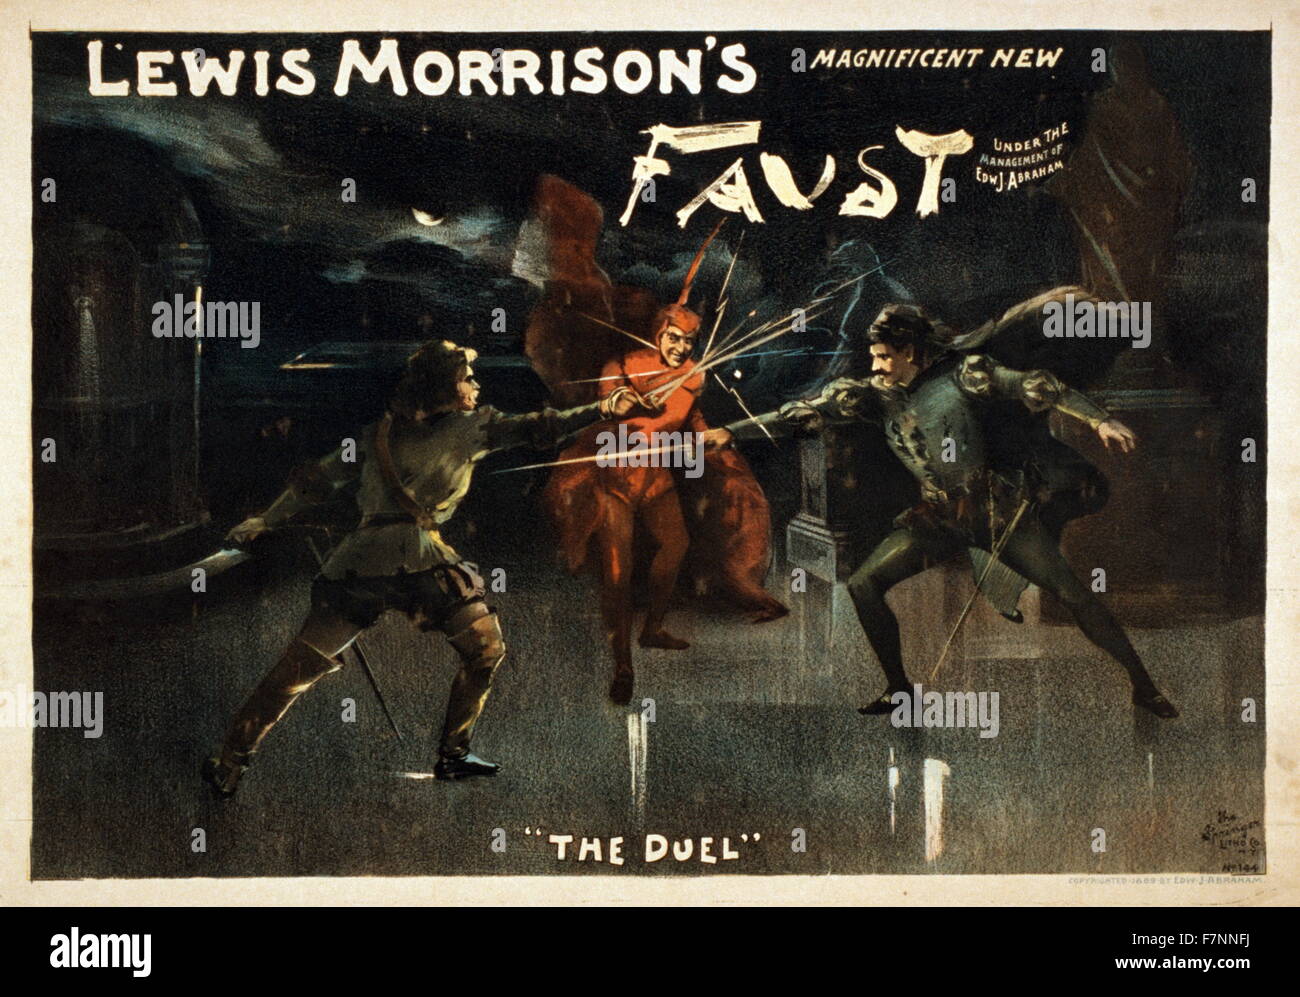 Advertisement poster for Lewis Morrison's 'Magnificent New Faust'. Showing a scene titled 'The Duel'. Stock Photo